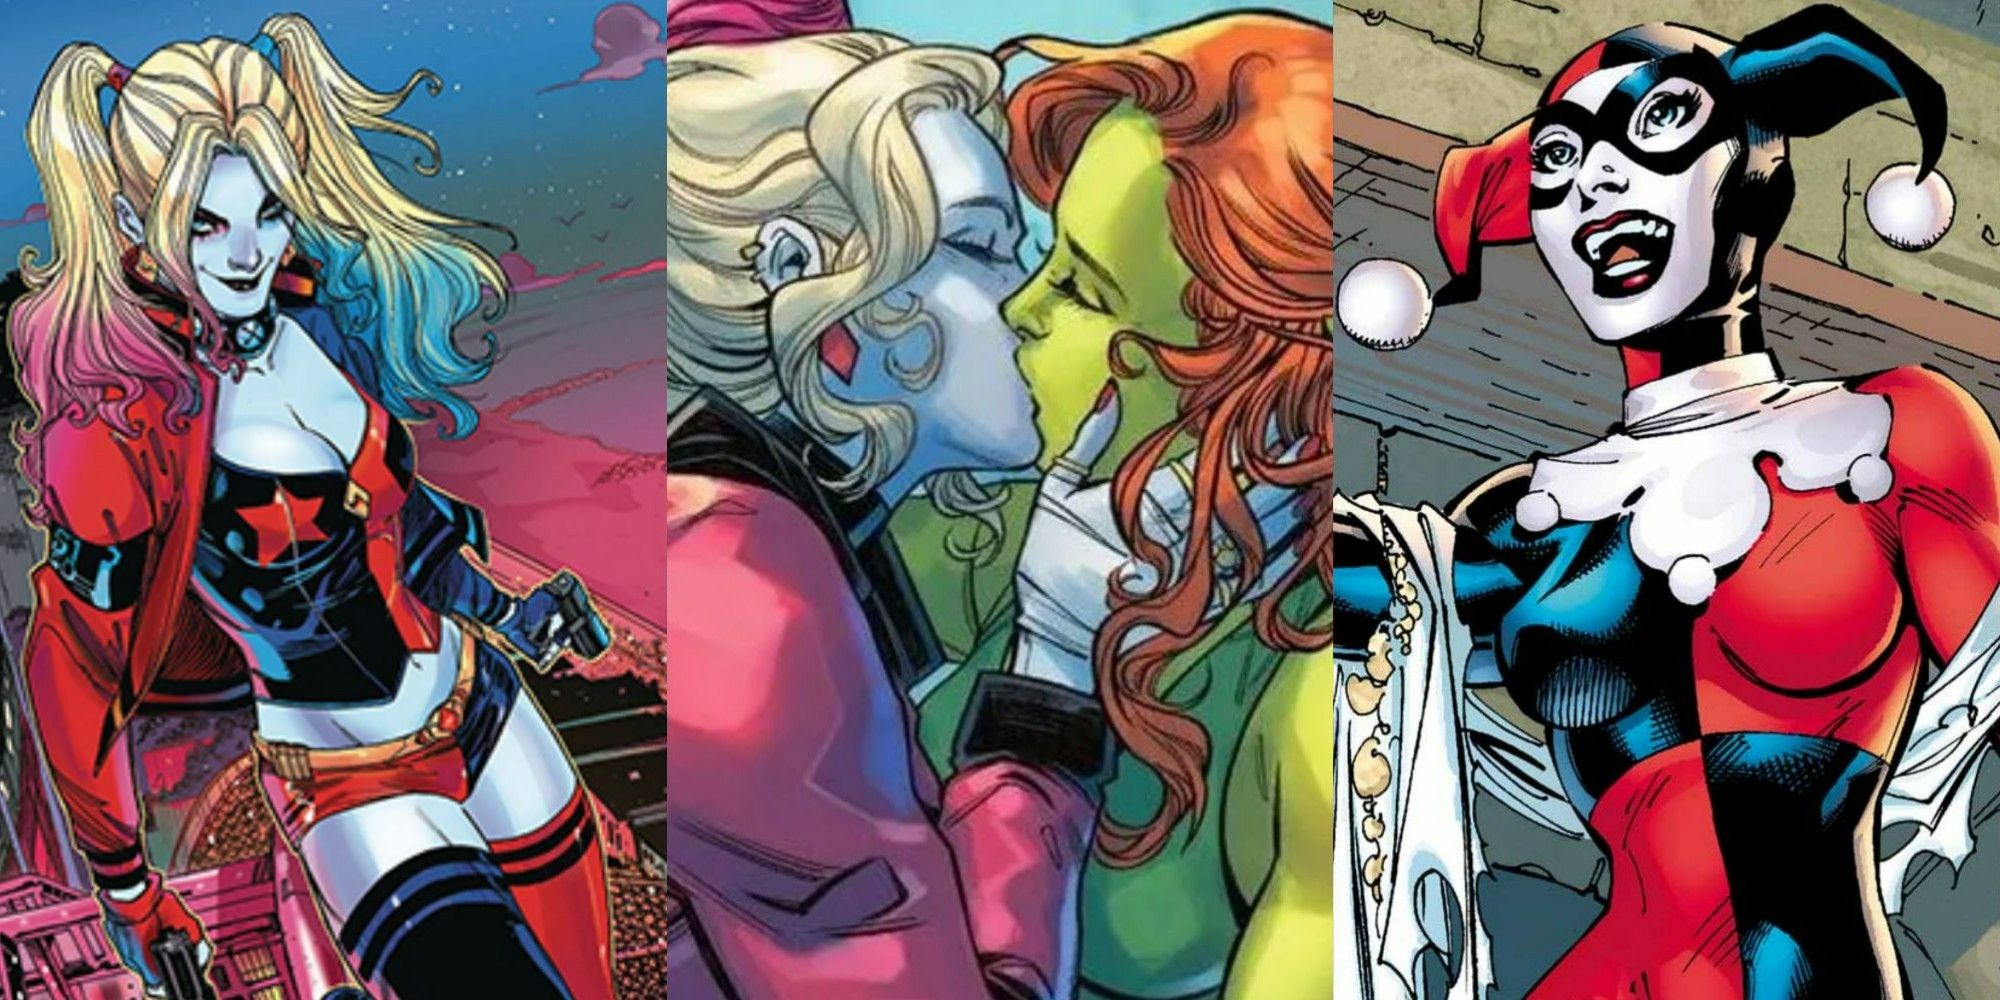 A split image of Harley Quinn smiling, or Harley Quinn kissing Poison Ivy, and Harley Quinn in her traditional DC Comics costume